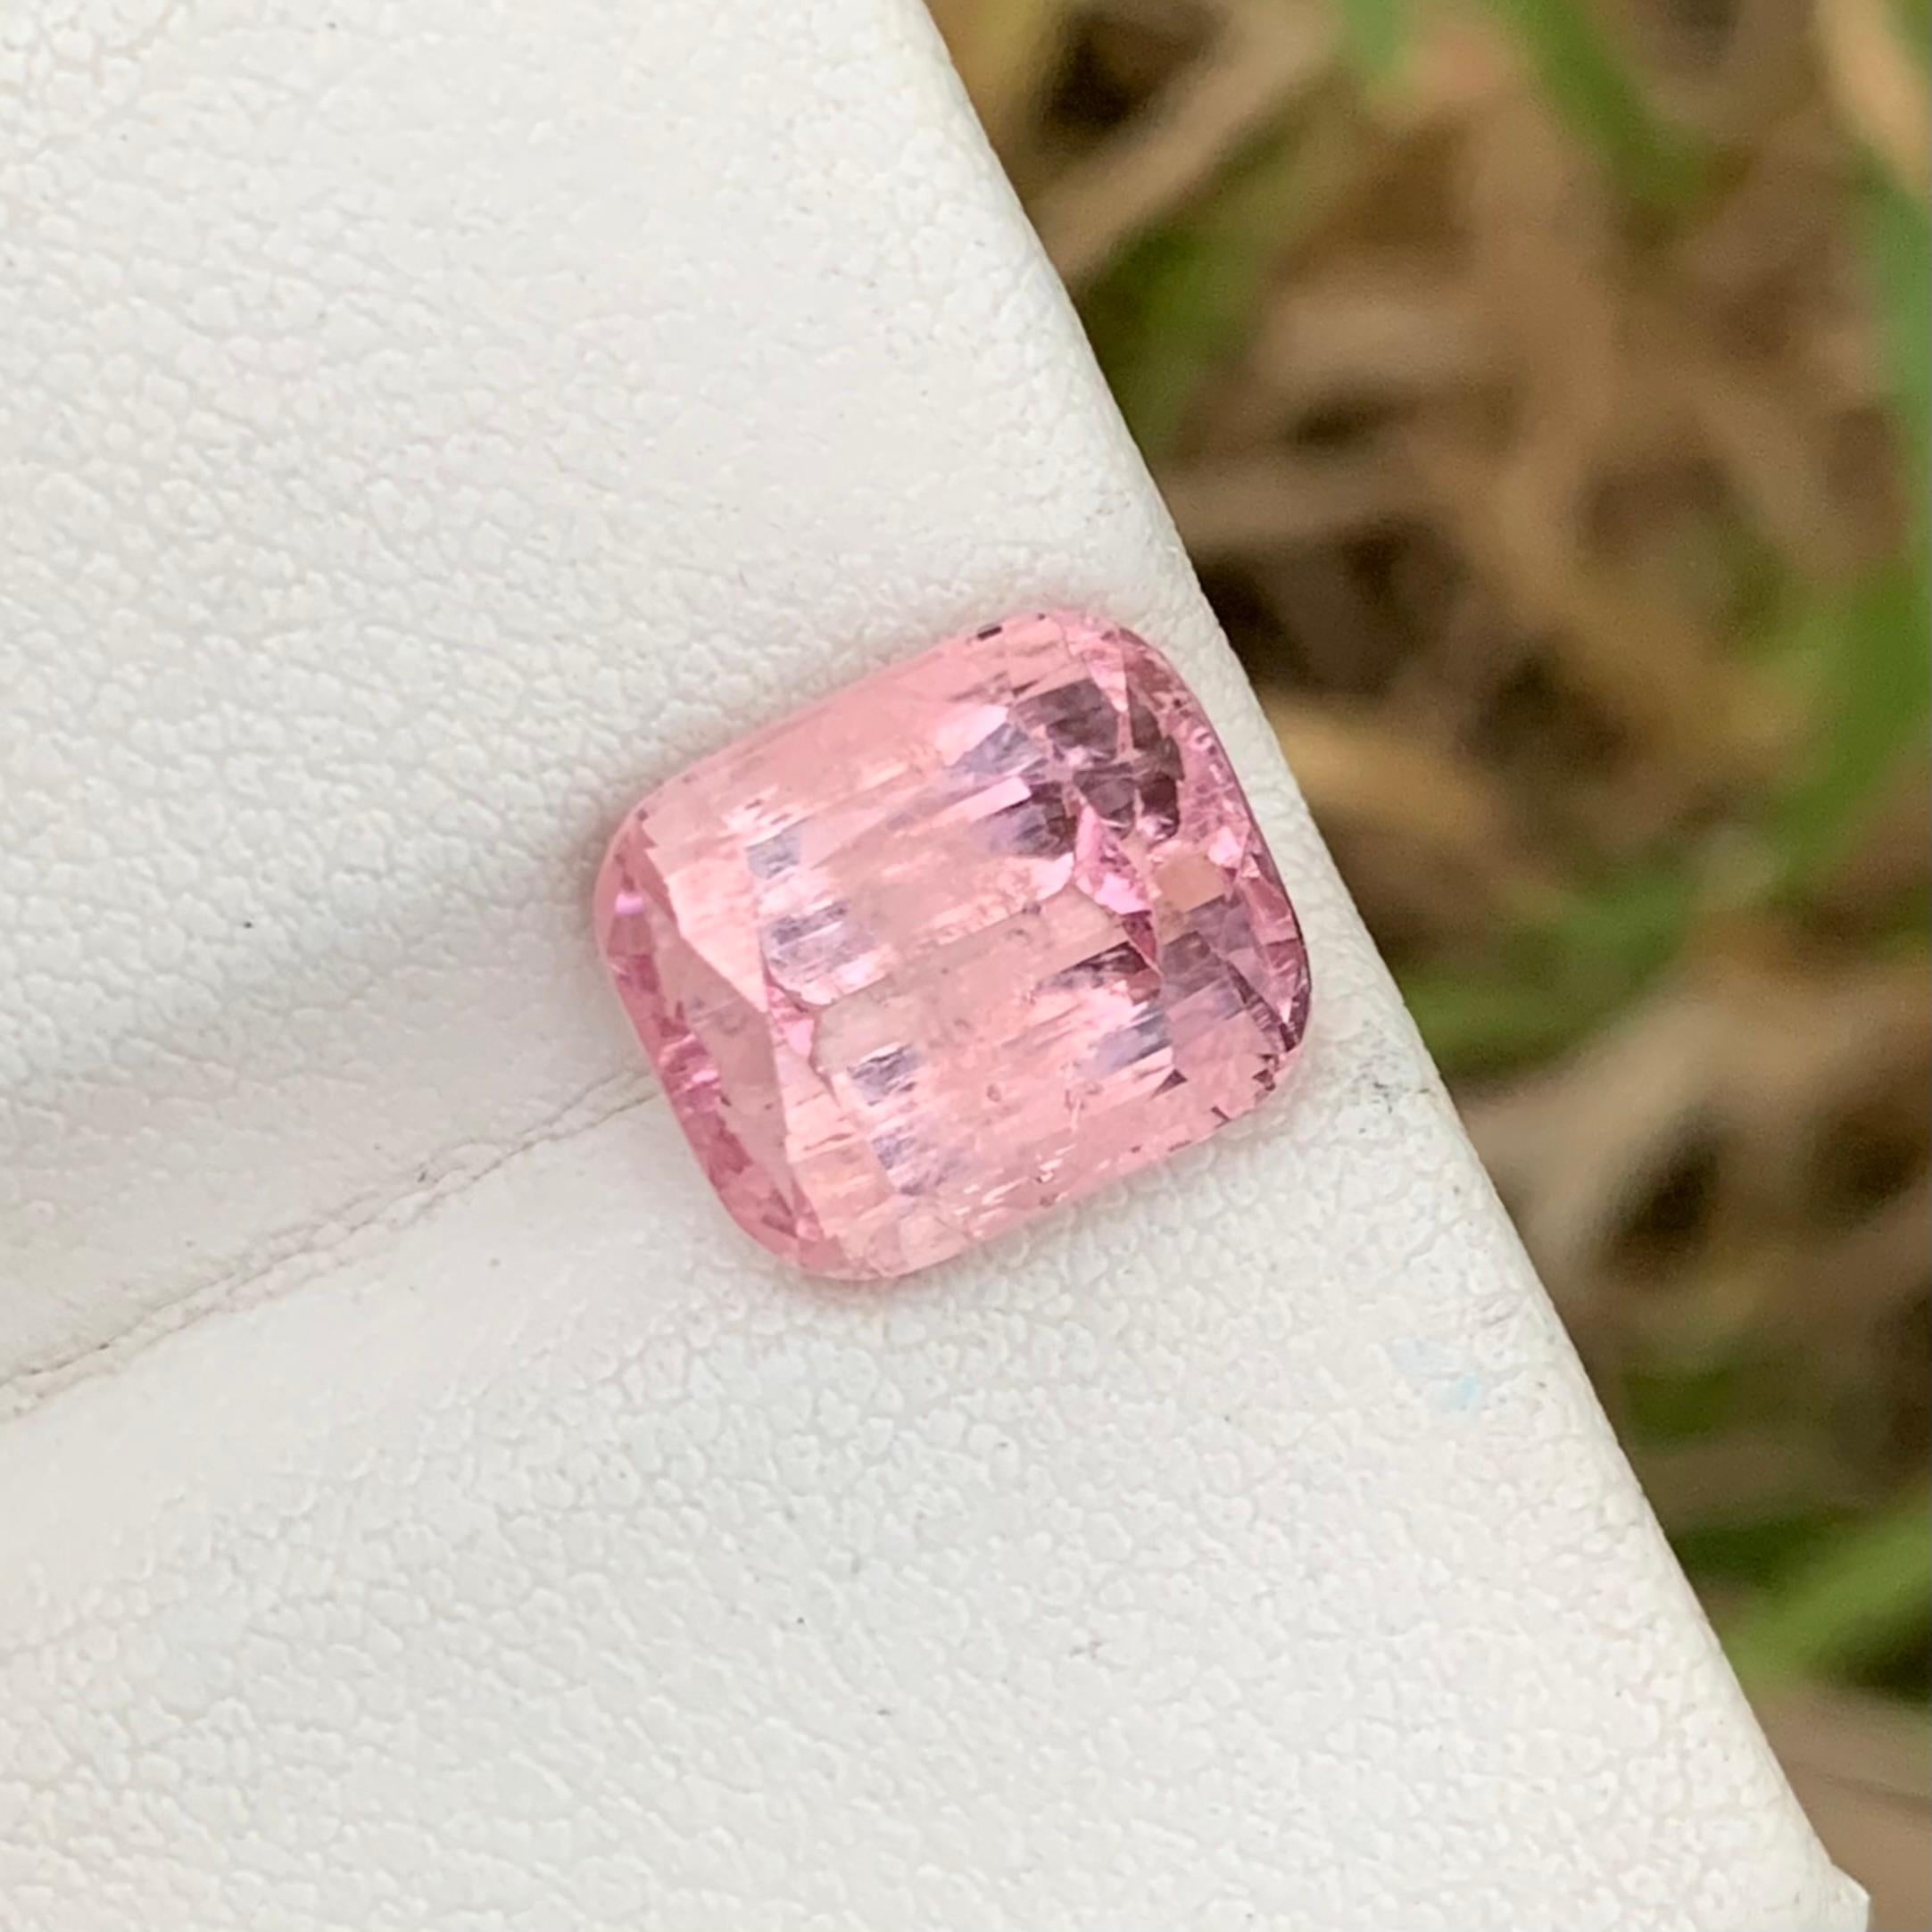 Loose Tourmaline 
Weight: 5.35 Carats 
Dimension: 10.5x9x7.2 Mm
Origin: Kunar Afghanistan 
Shape: Cushion
Color: Pink
Clarity: Included
Treatment: Non
Certificate: On Client Demand
.
Pink tourmaline, also known as 